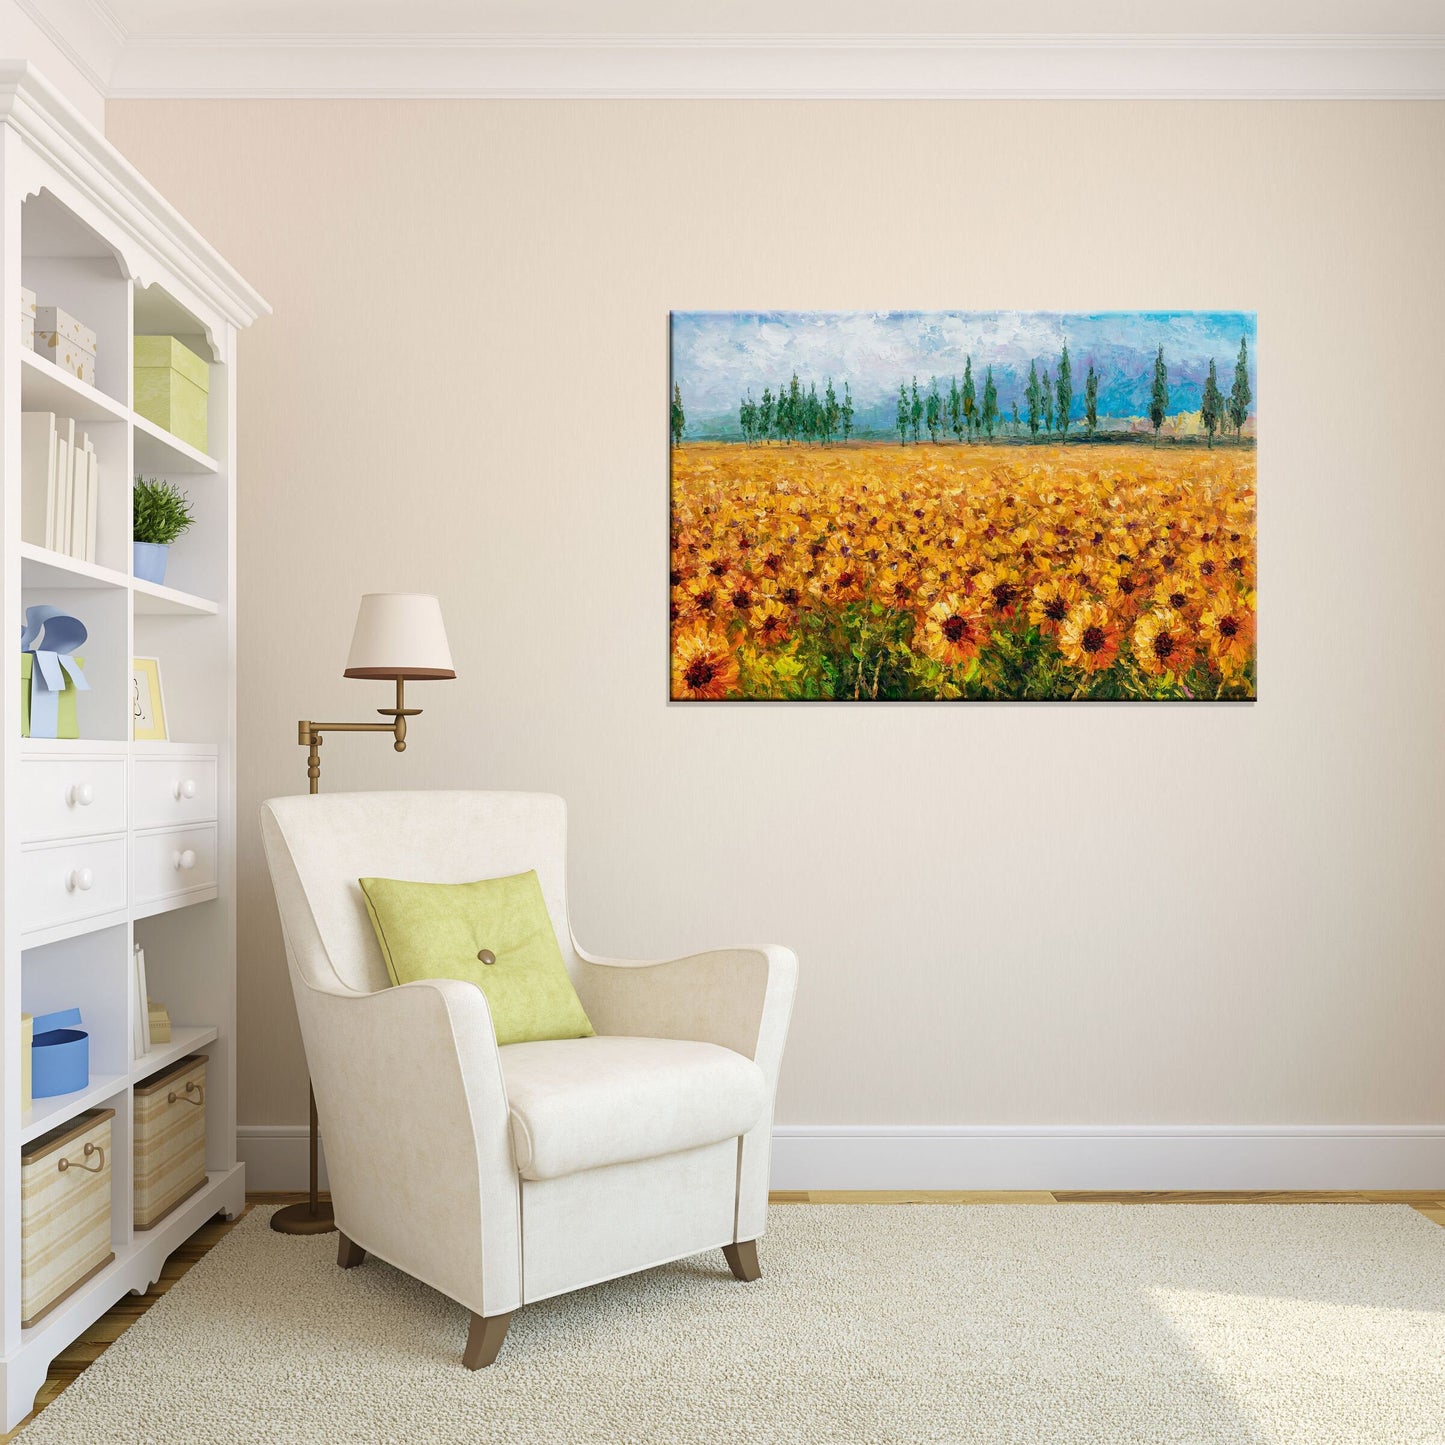 Add Some Charm to Your Home with George Miller's Vibrant Oil Painting of Sunflower Fields - Ready to Hang 32x48-Inches, Housewarming Gift